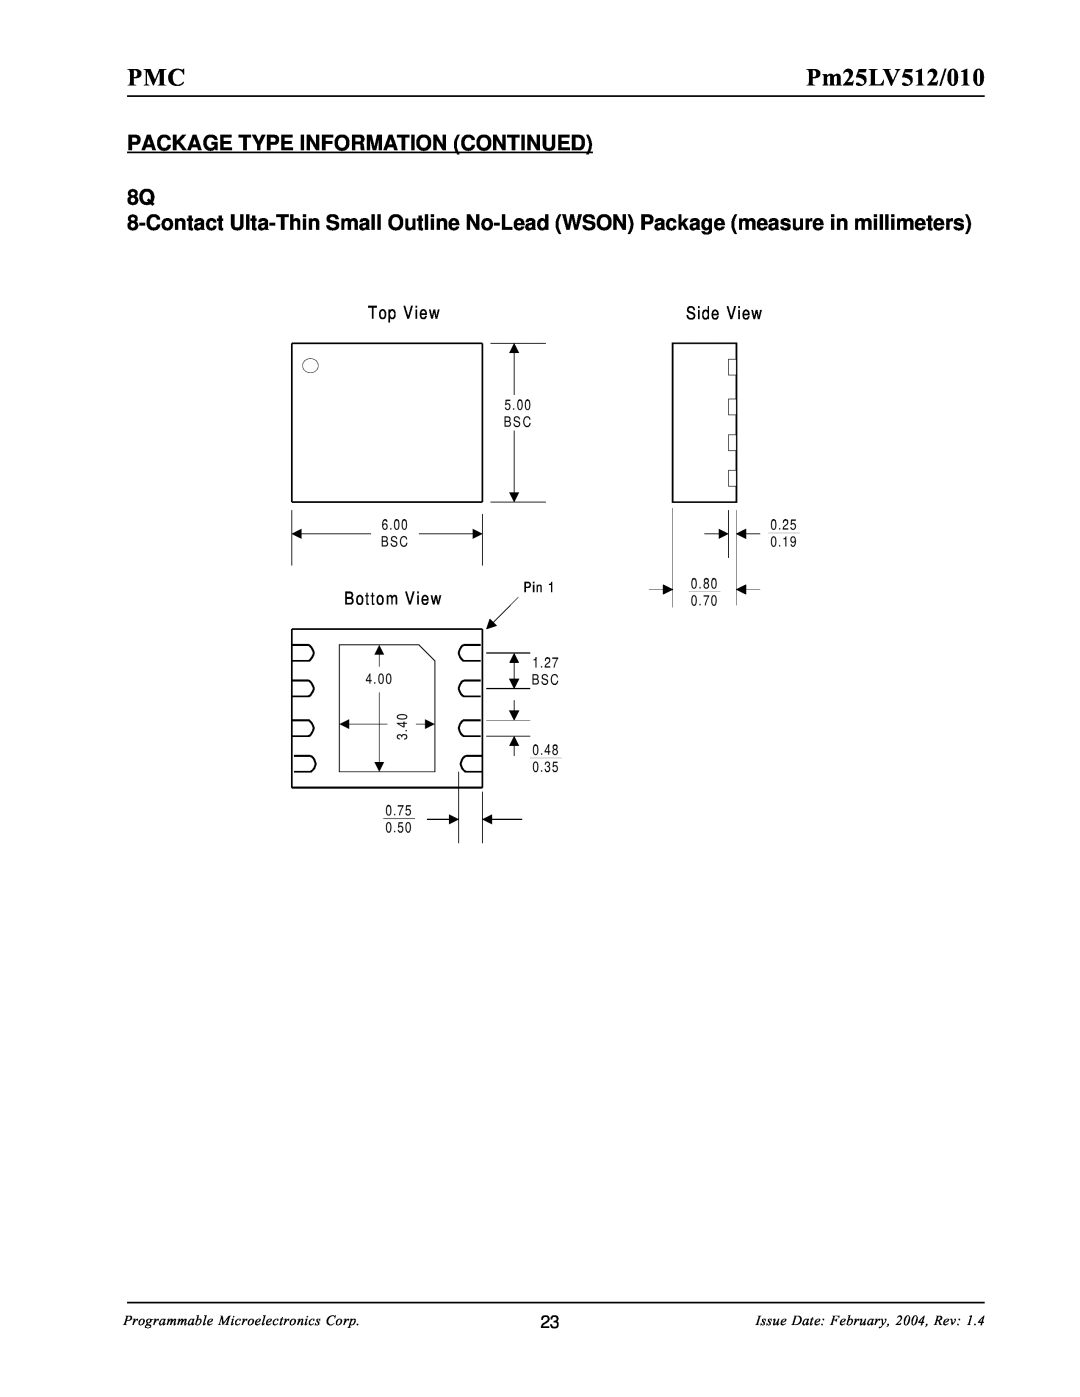 PMC-Sierra Pm25LV010 manual PACKAGE TYPE INFORMATION CONTINUED 8Q, Pm25LV512/010, Issue Date February, 2004, Rev, 3.40 